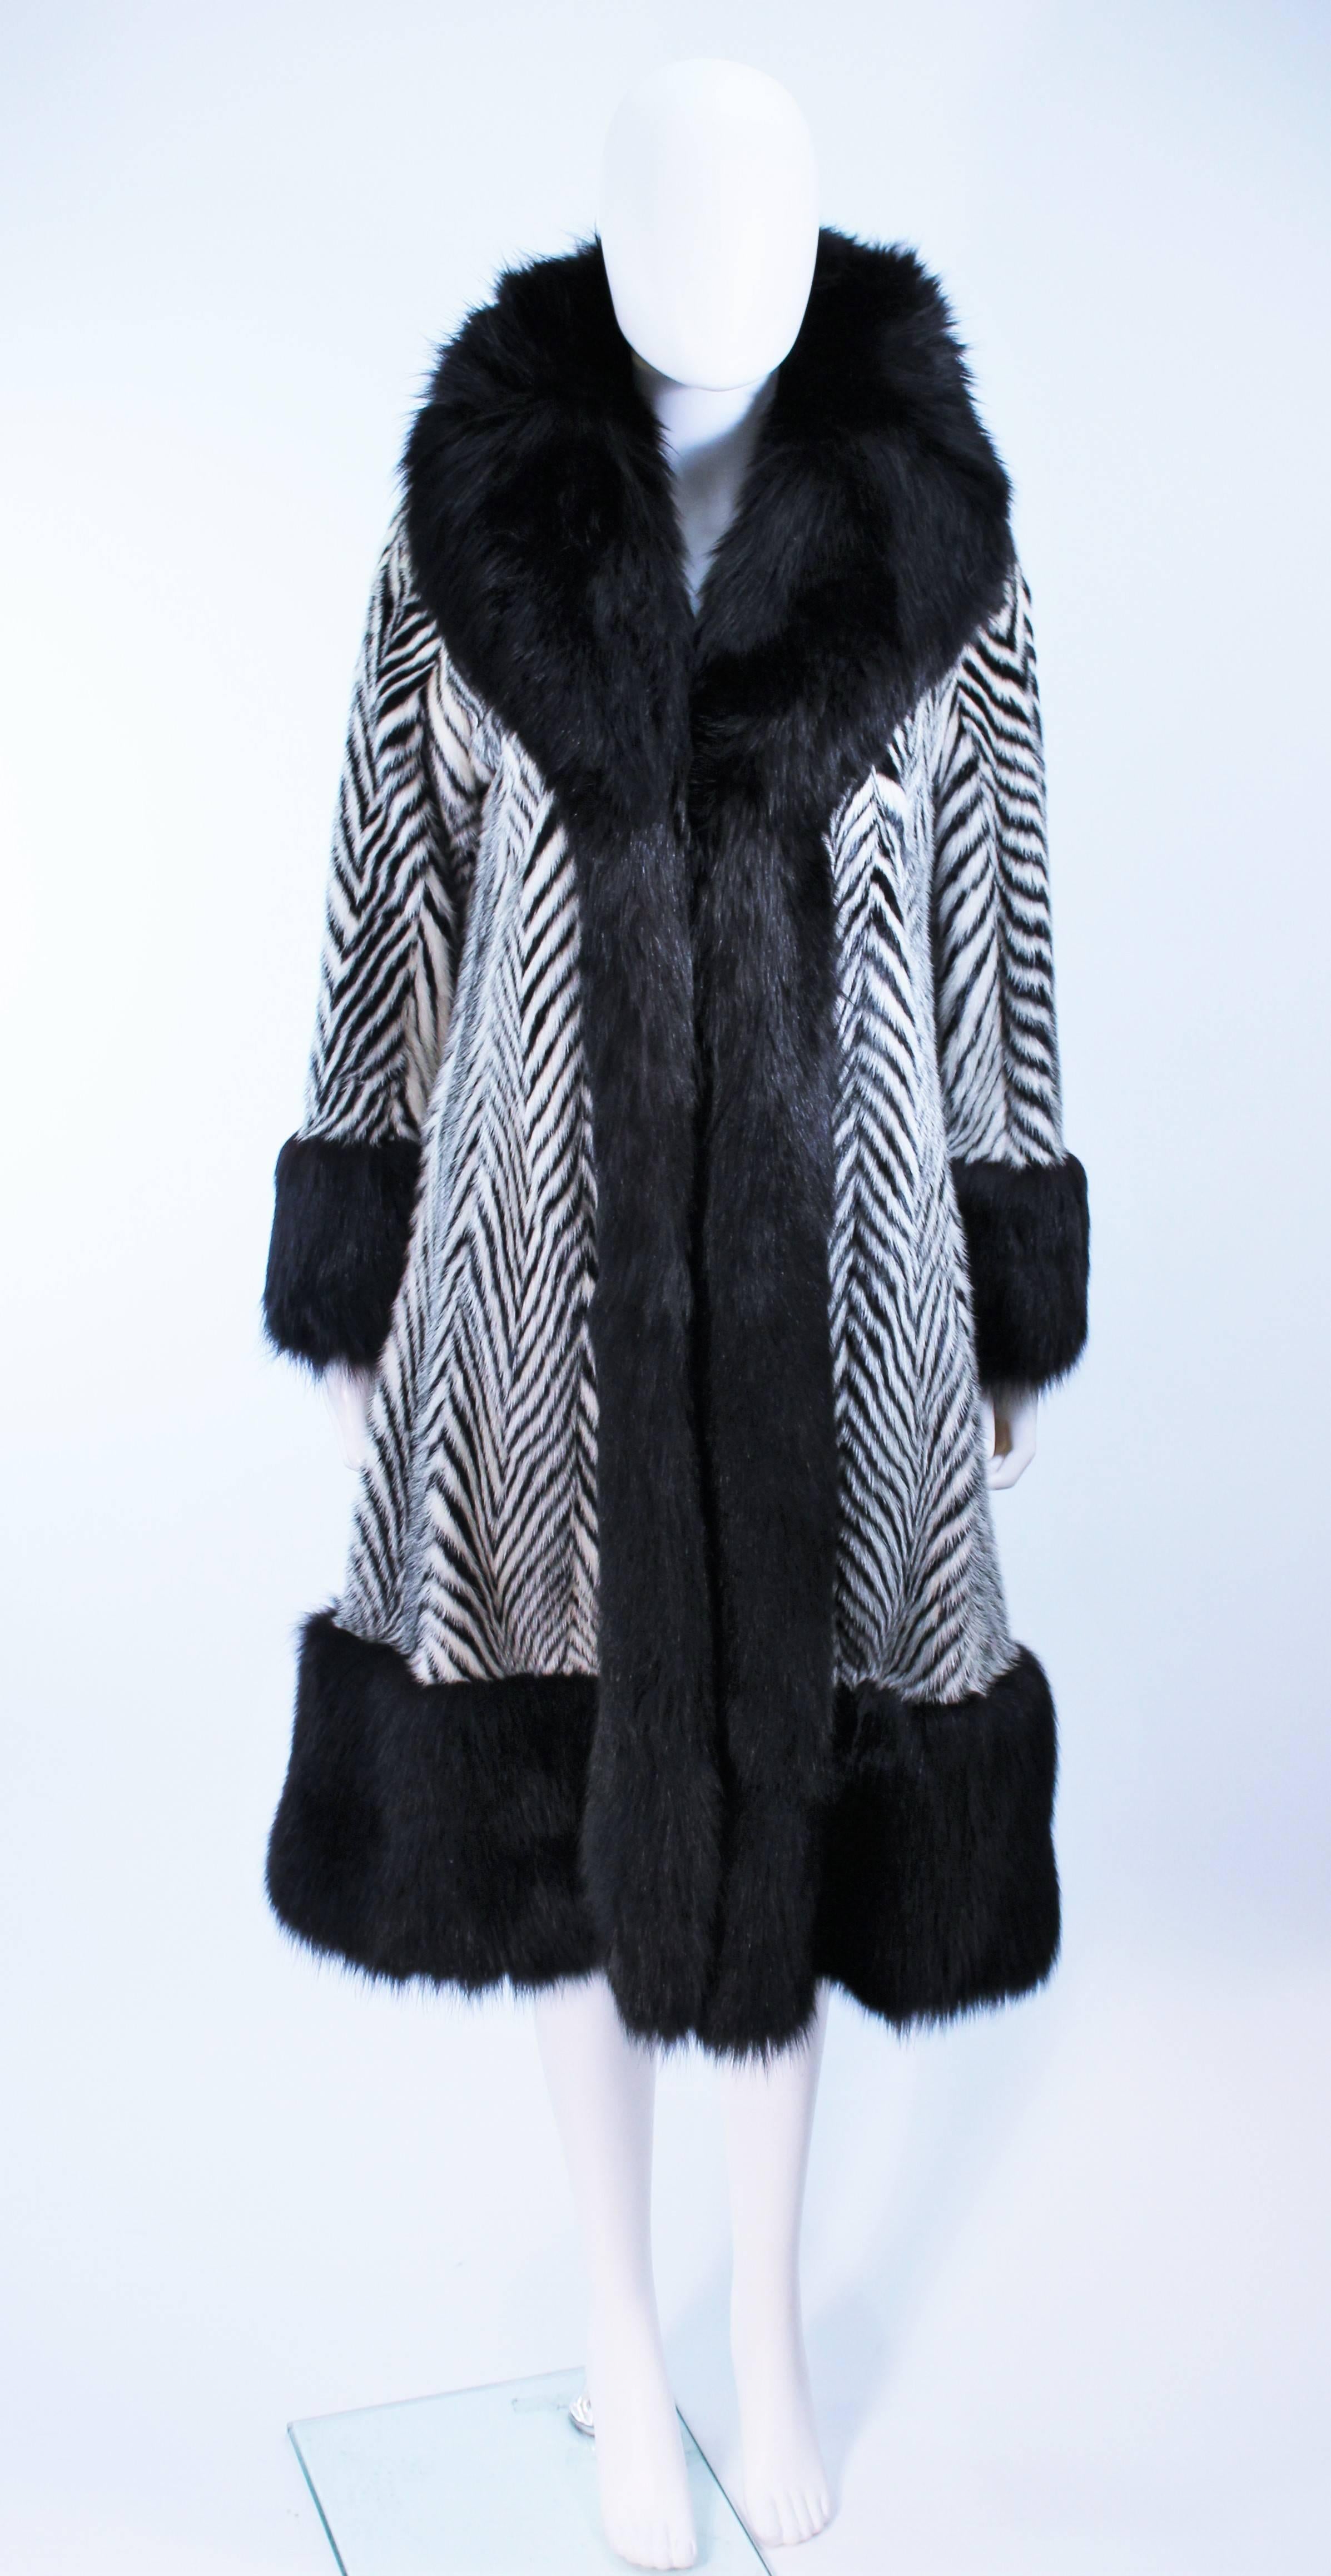 This coat is a custom Zaccaria  of California Fur coat, composed of a black fox collar and cuffs with black and white mink in a stunning chevron pattern.  There are side pockets as well as (3) center front hook and eye closures. Silk lining and